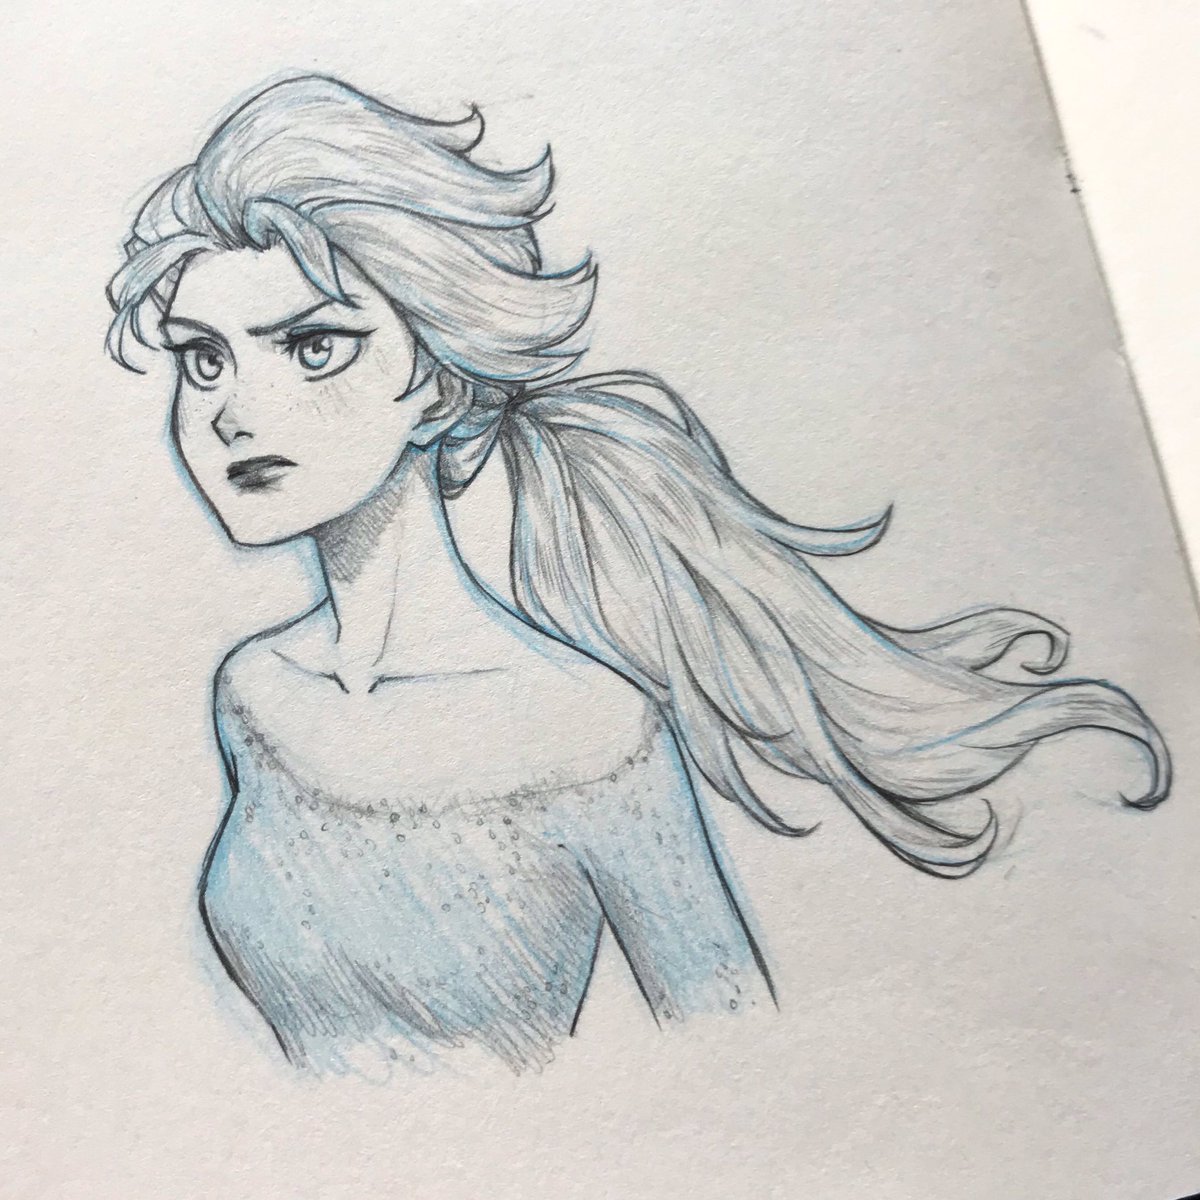 How to Draw Elsa from Frozen 2 Step-by-Step Pictures